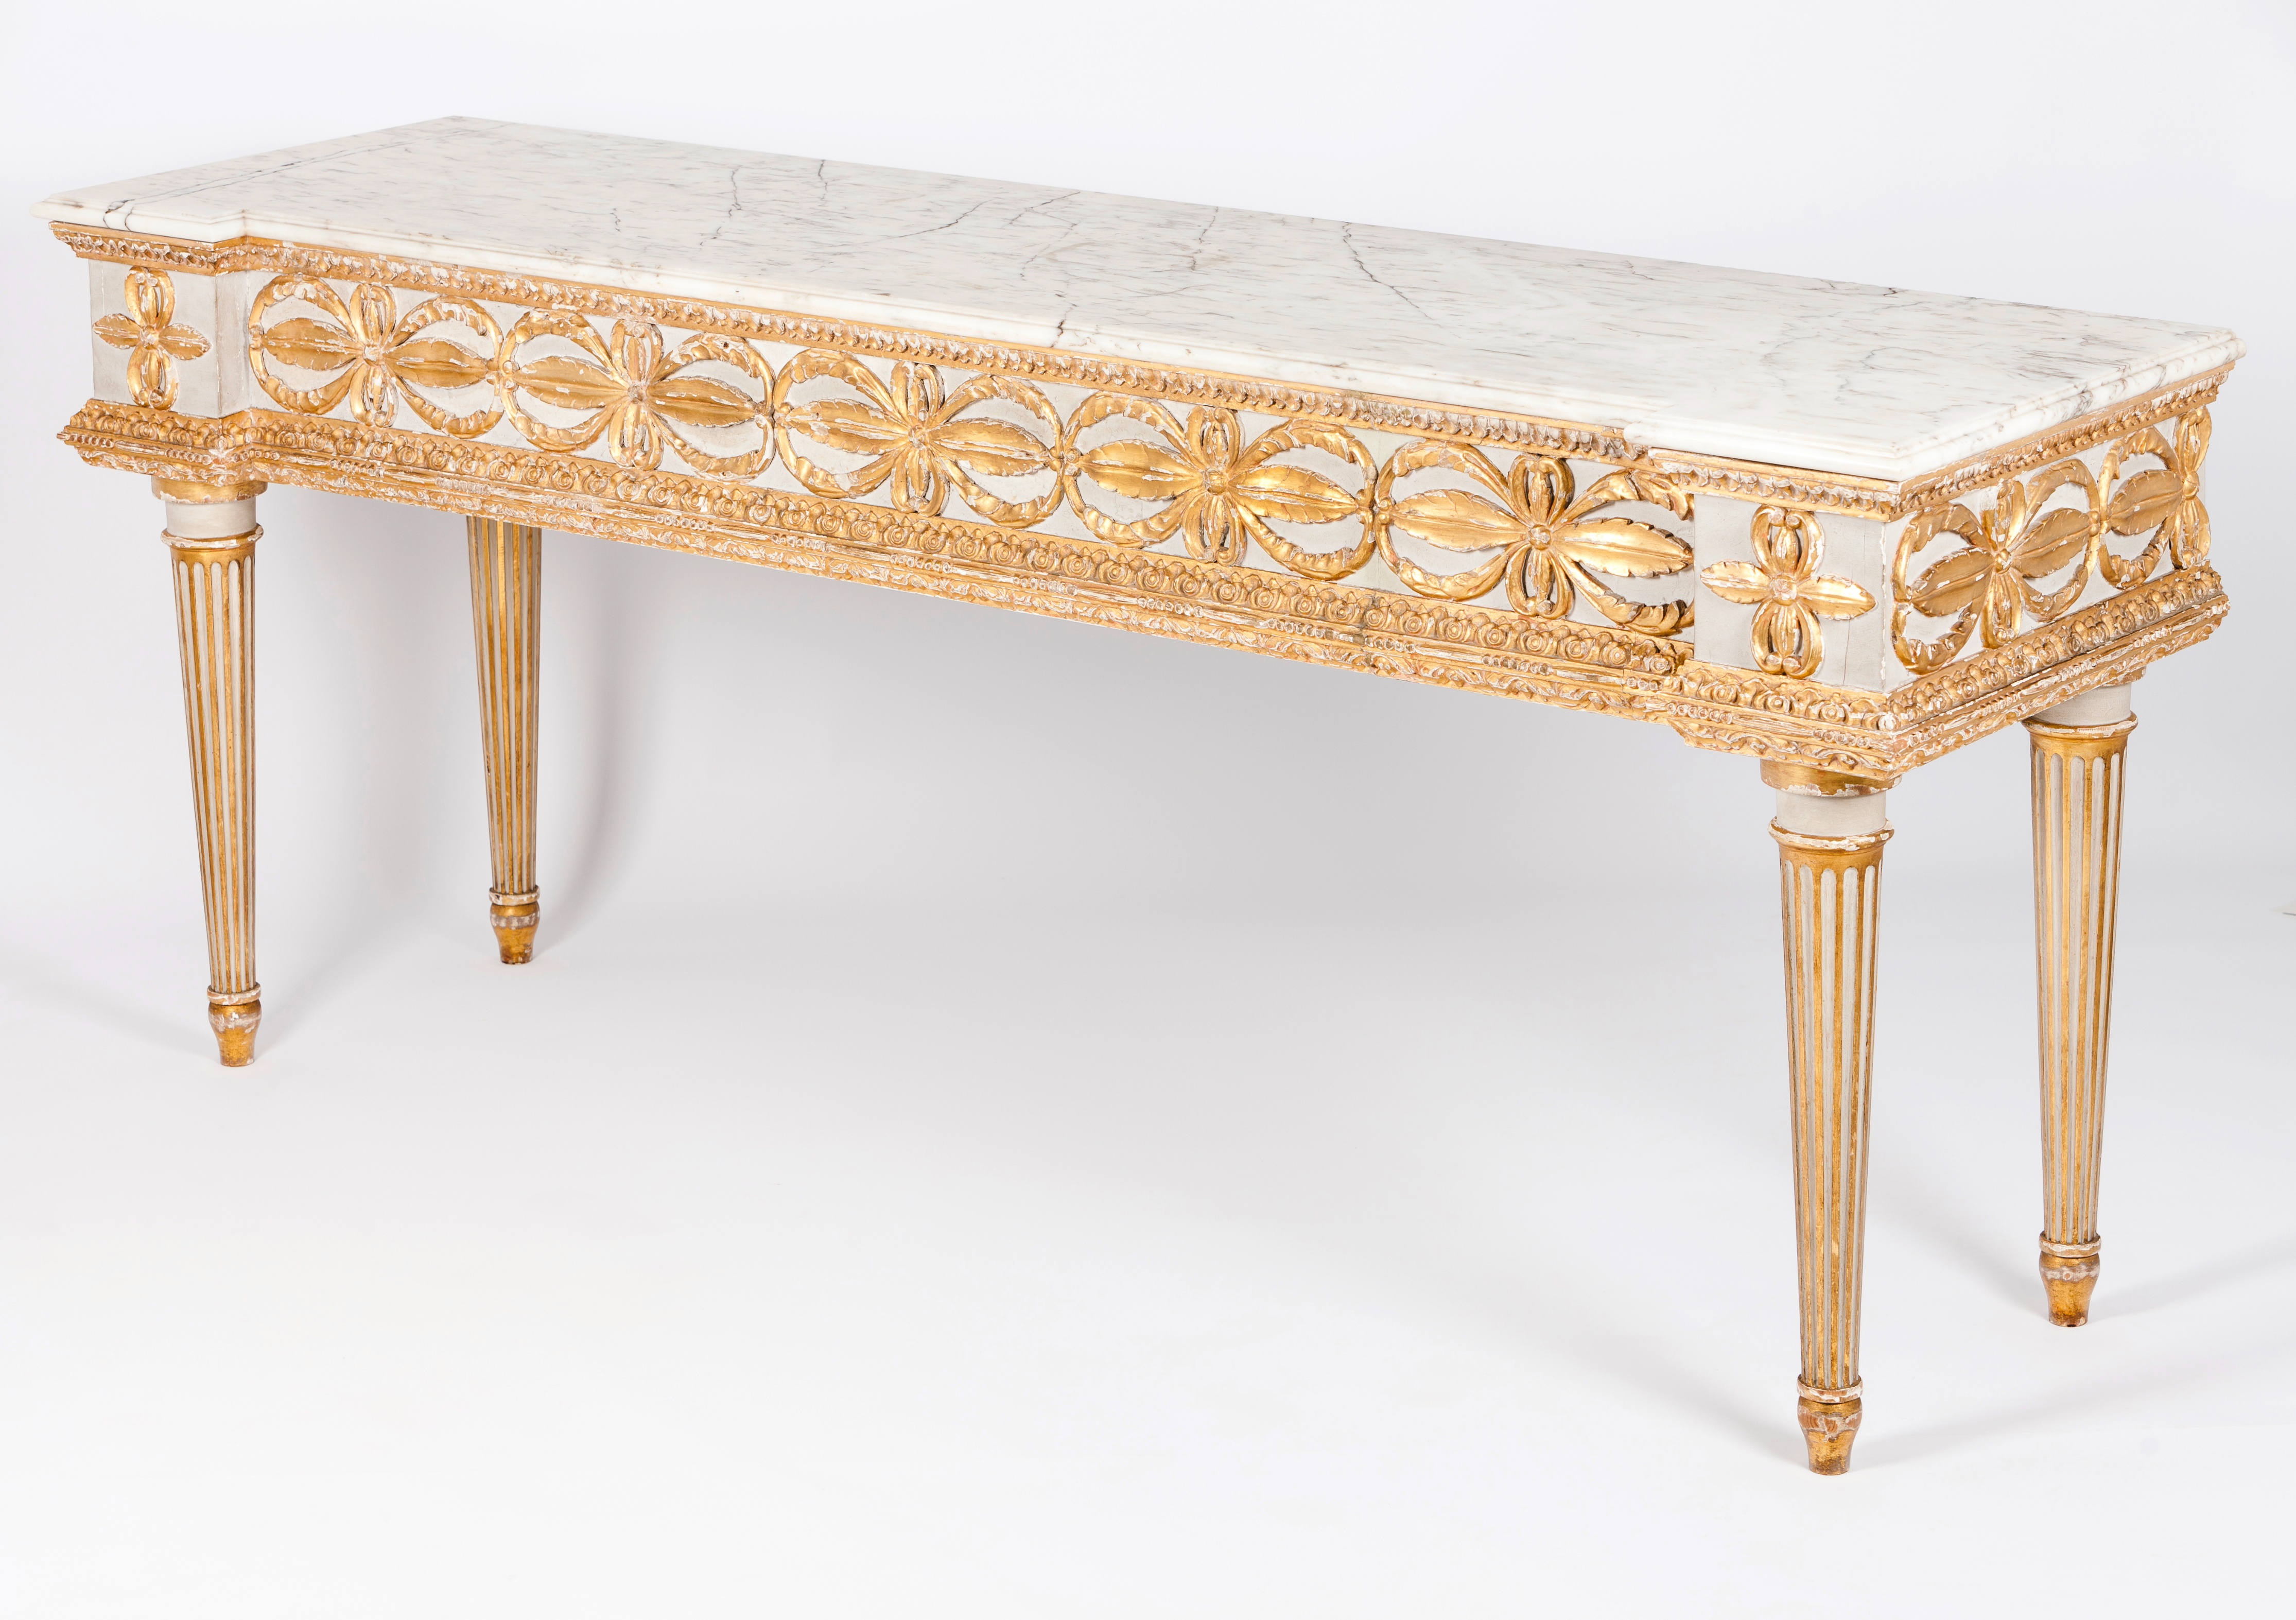 A pair of large credence tablesLacquered and gilt wood Carved and fluted decoration with foliage - Image 2 of 2